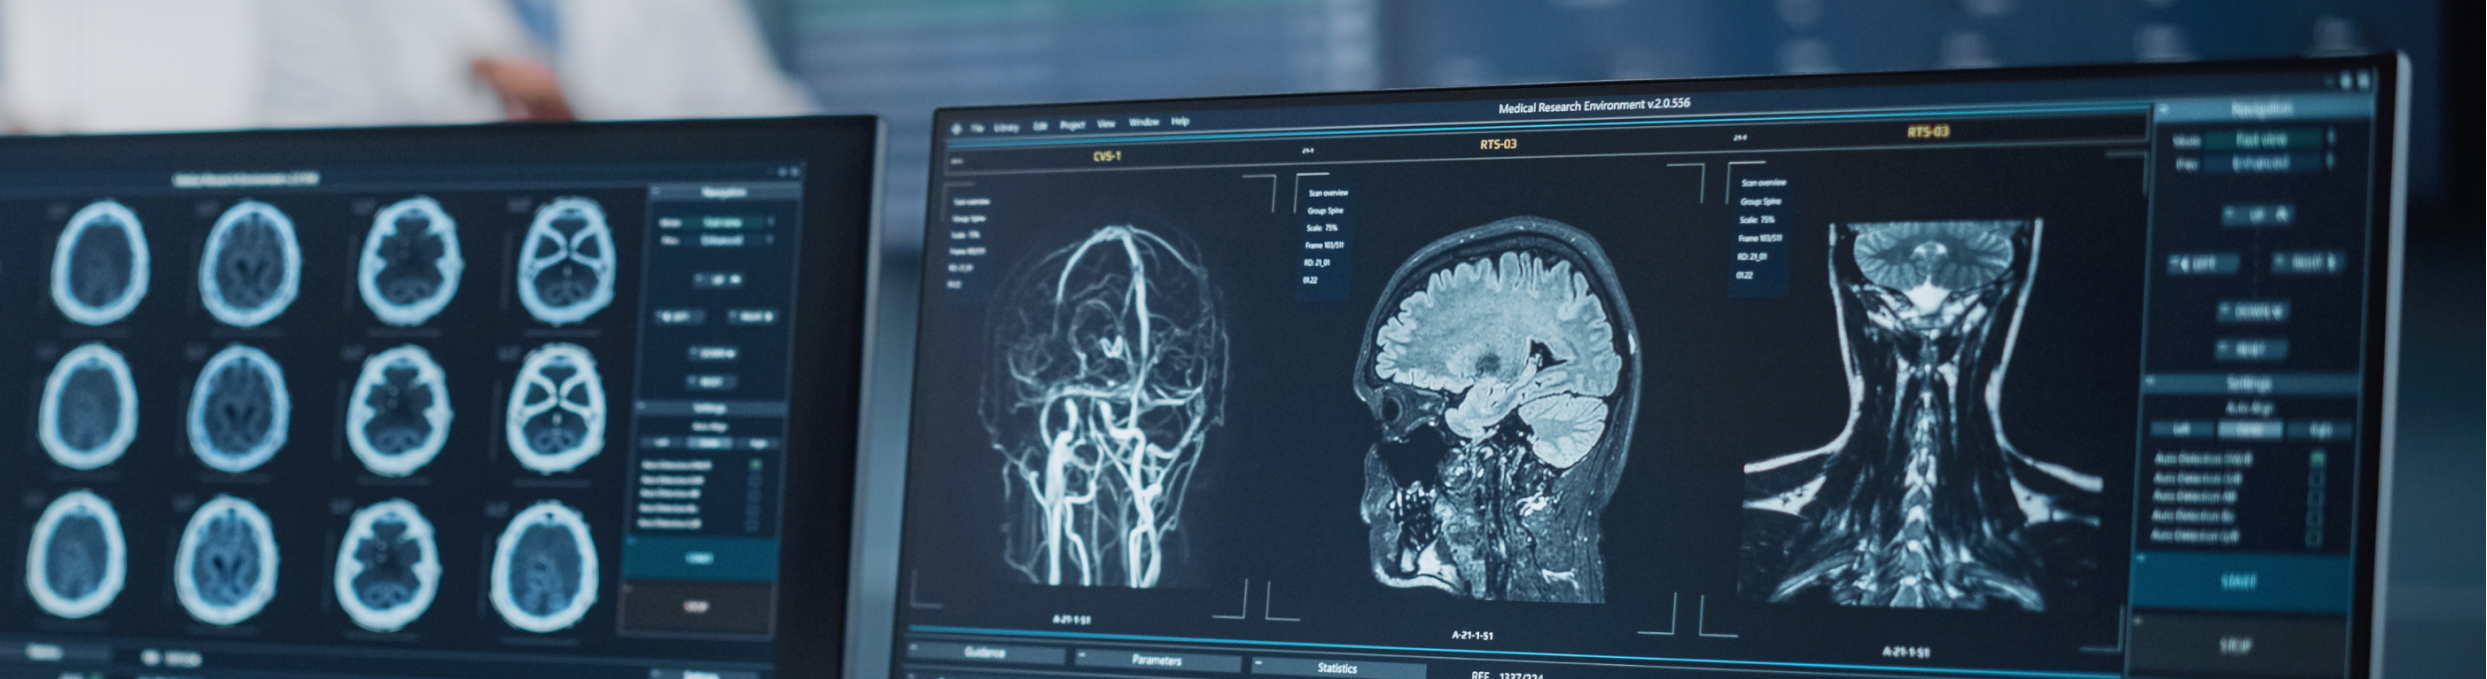 Photo of monitors with brain scans